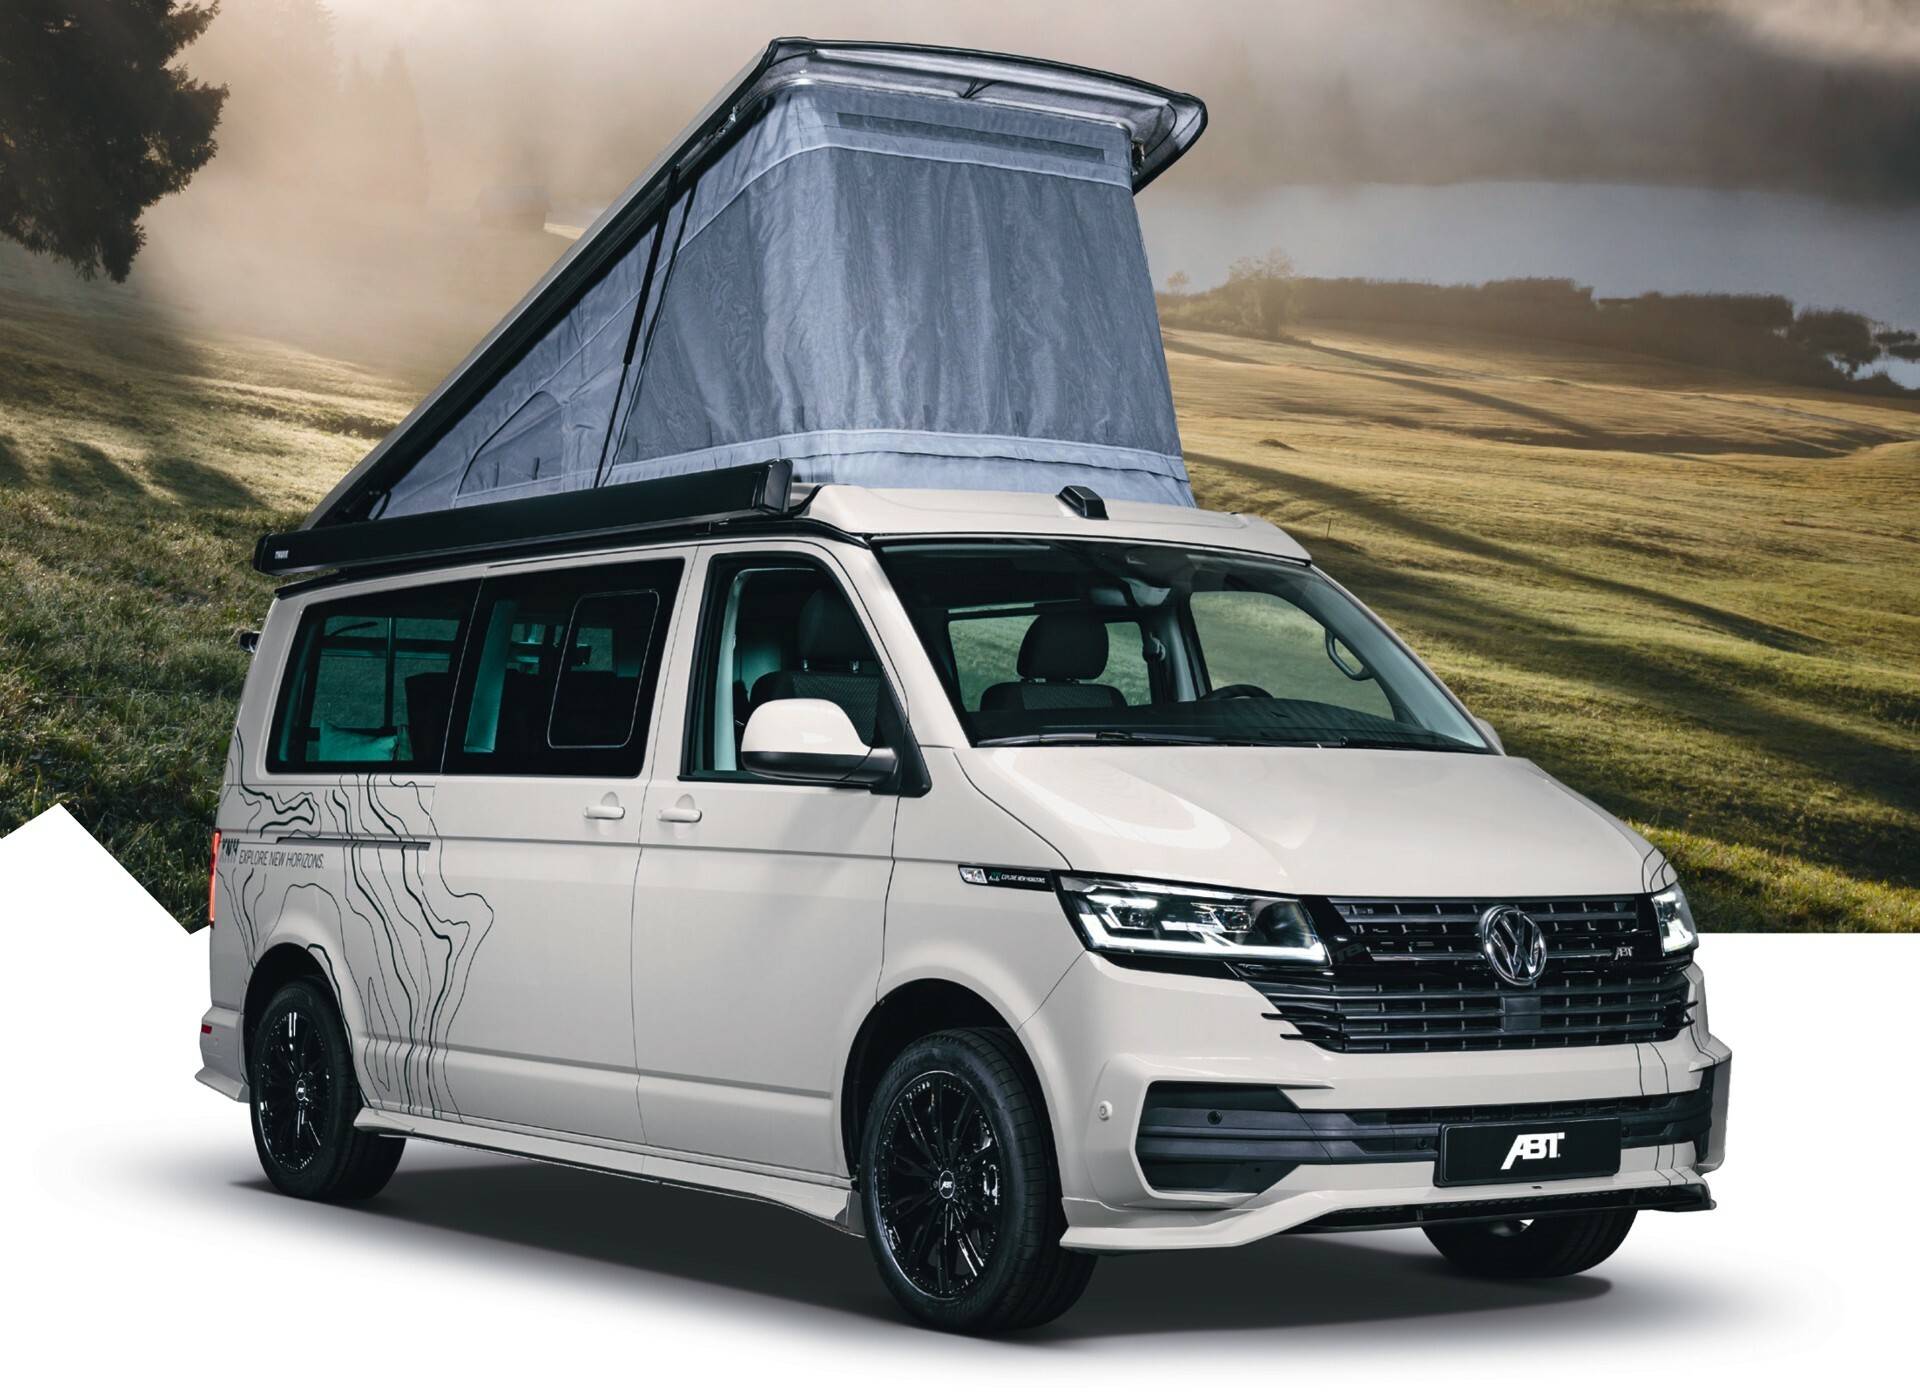 The ABT XNH Is A $148,000 VW Camper Van With A Pop-Up Roof | Carscoops